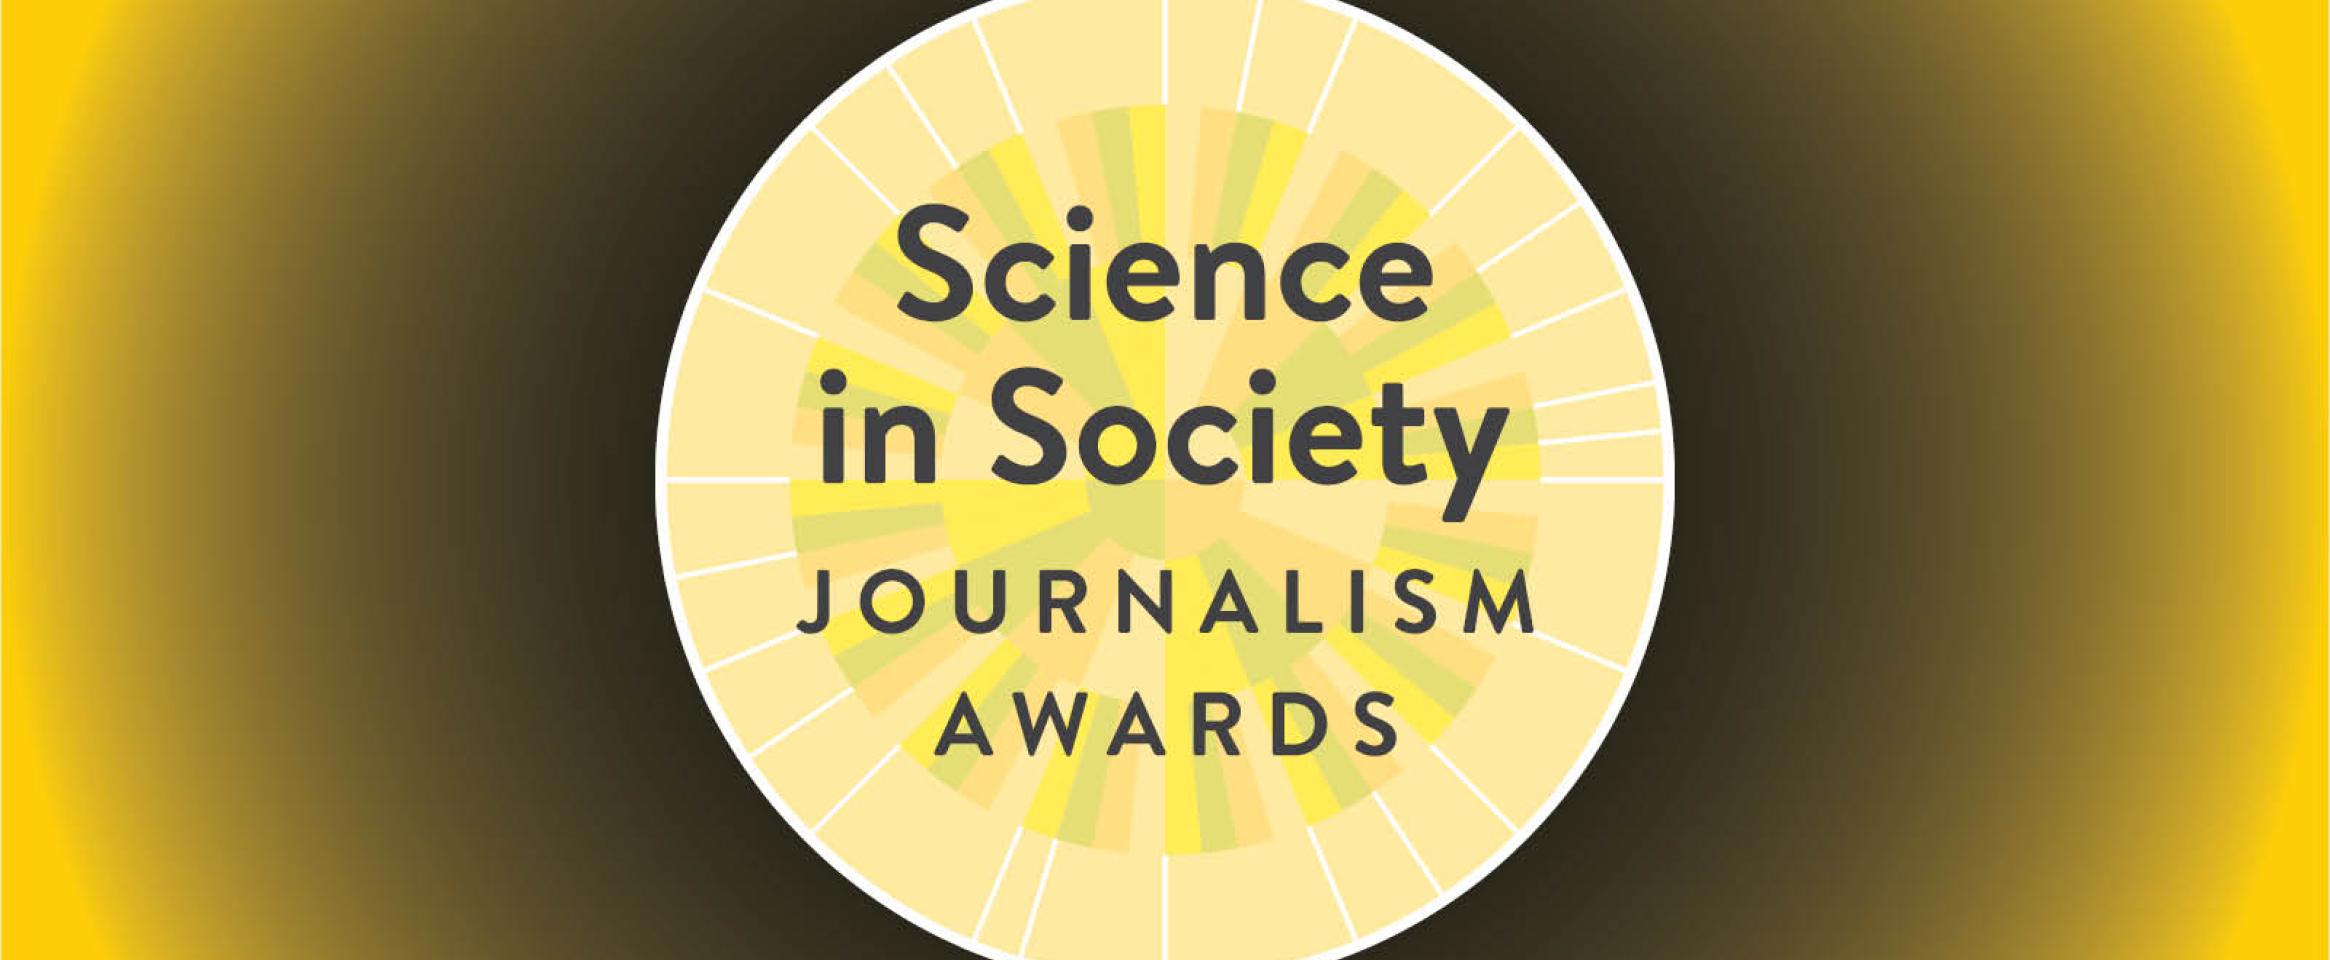 Graphic with circular logo of the N A S W Science in Society Journalism Awards, which somewhat resembles a rosette or a plasmid diagram. The logo is set against a radiating gradient pattern, evoking the sense of knowledge diving deep into the unknown.